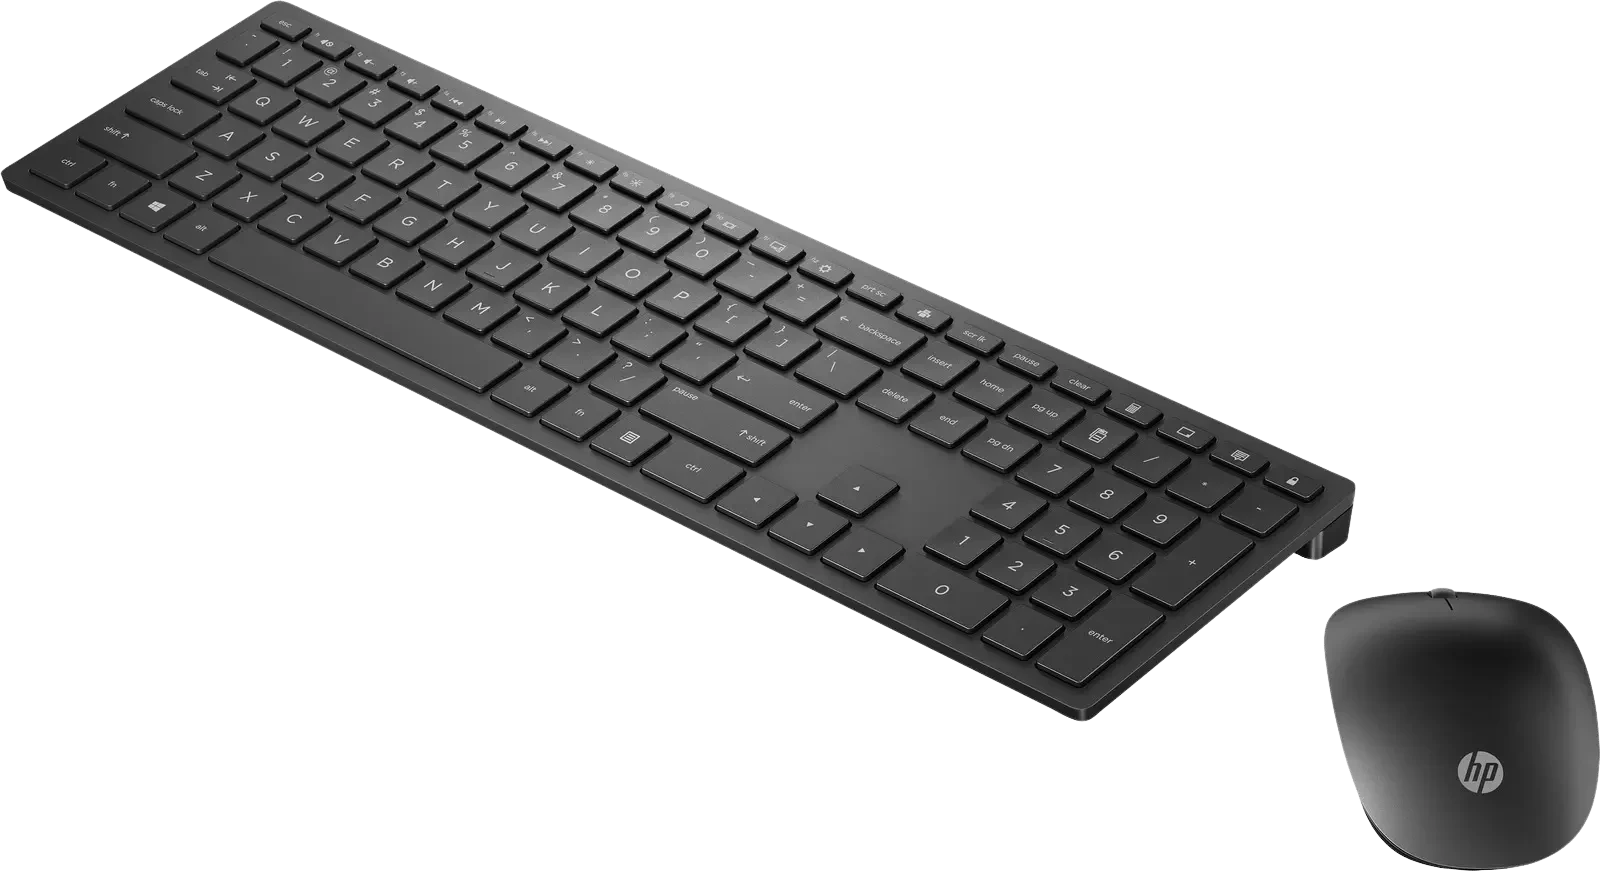 HP Pavilion Wireless Keyboard and Mouse 800 Black - 4CE99AA